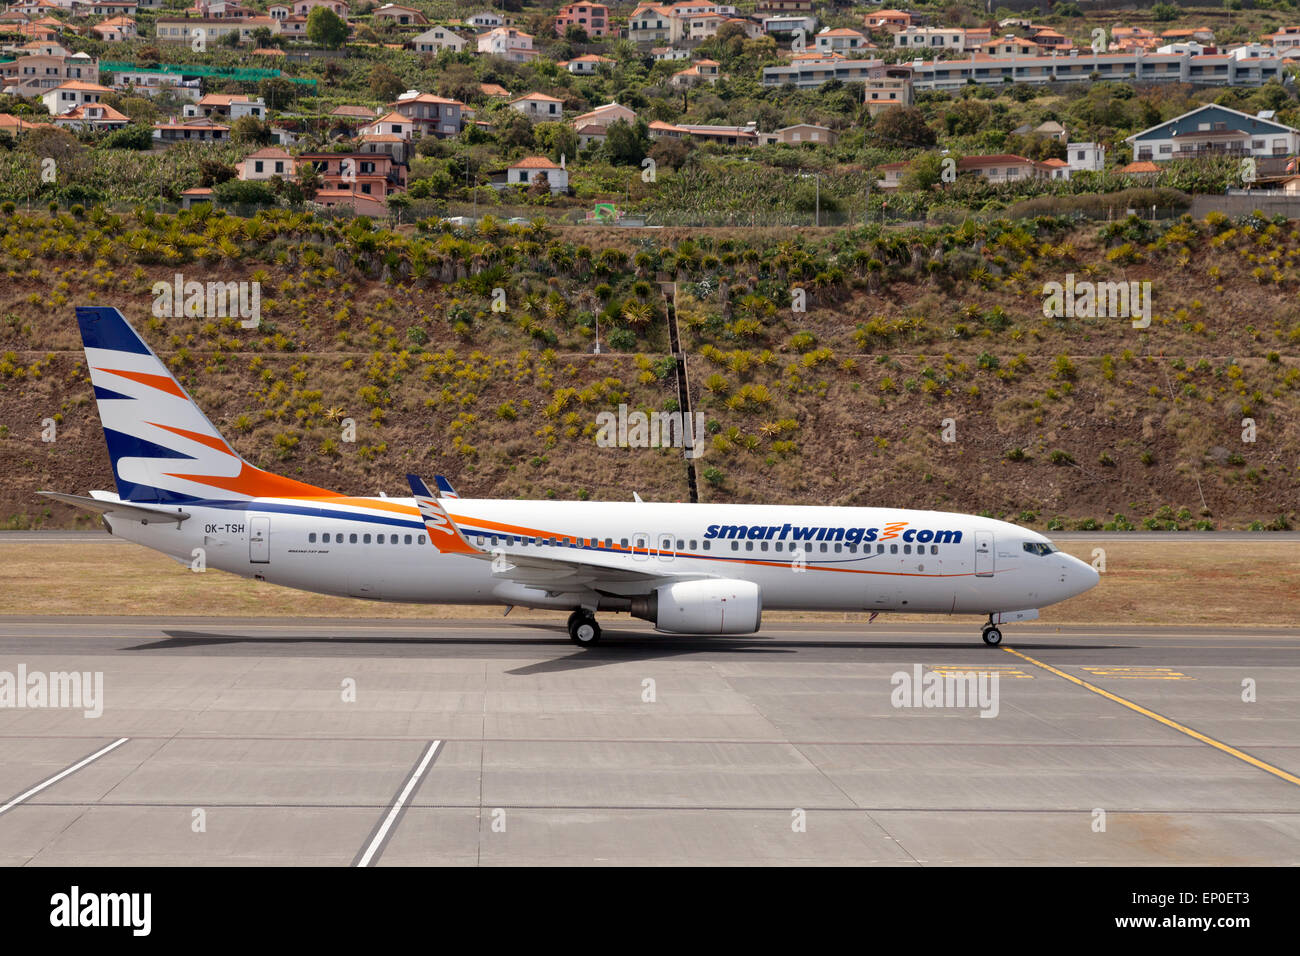 A Smartwings airline Boeing 737-800 plane on the ground, Funchal airport, Madeira Europe Stock Photo